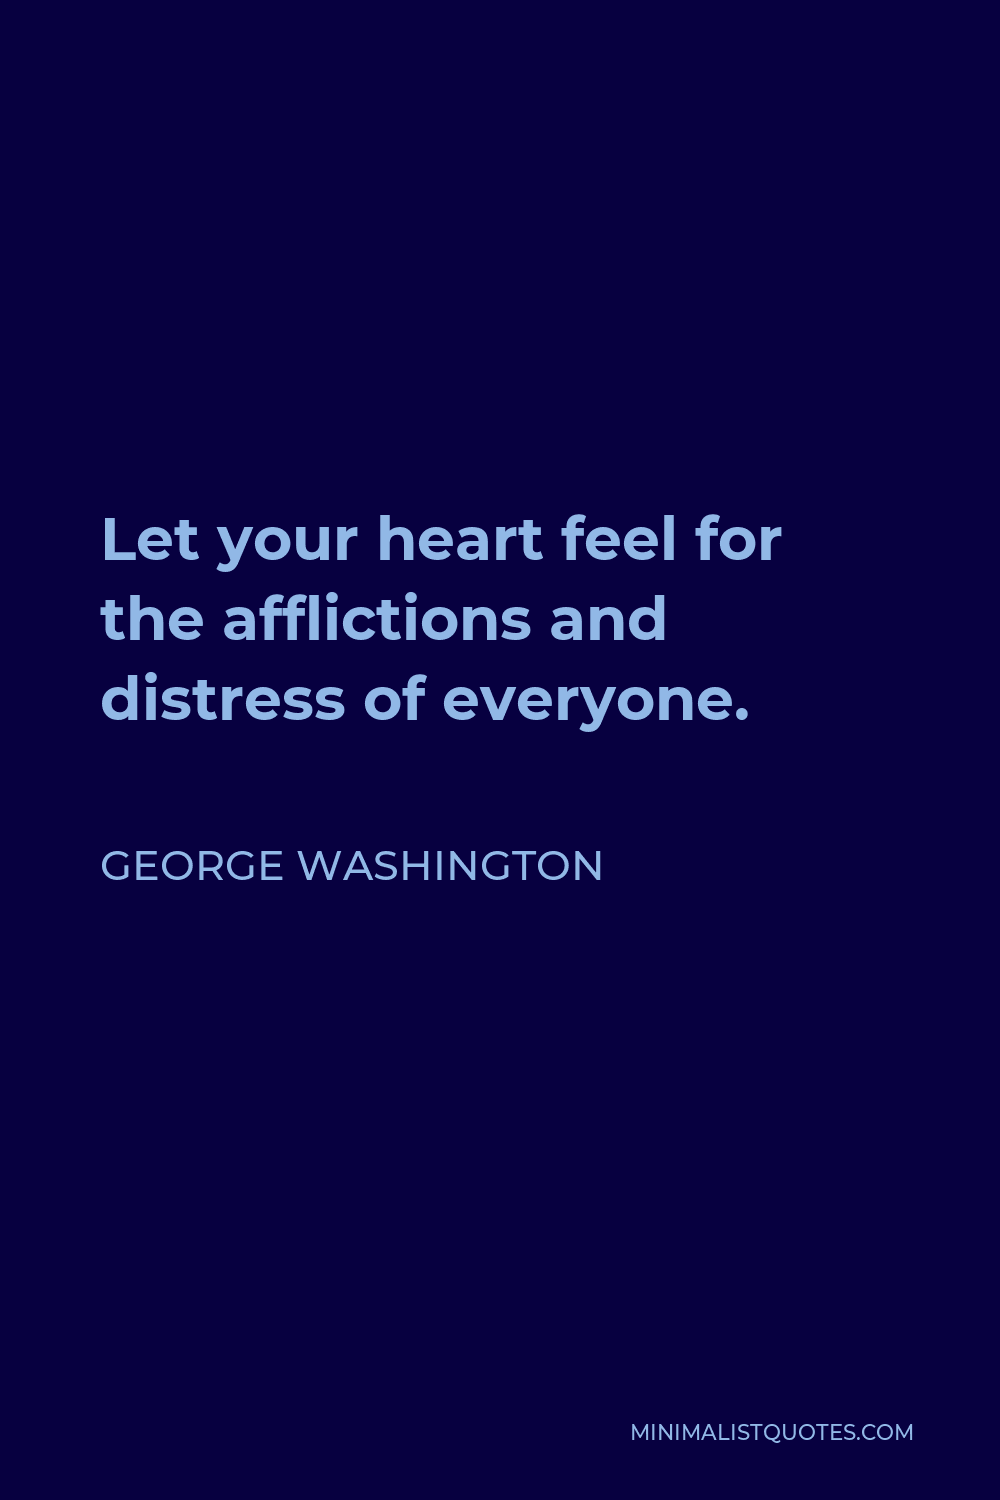 George Washington Quote - Let your heart feel for the afflictions and distress of everyone.